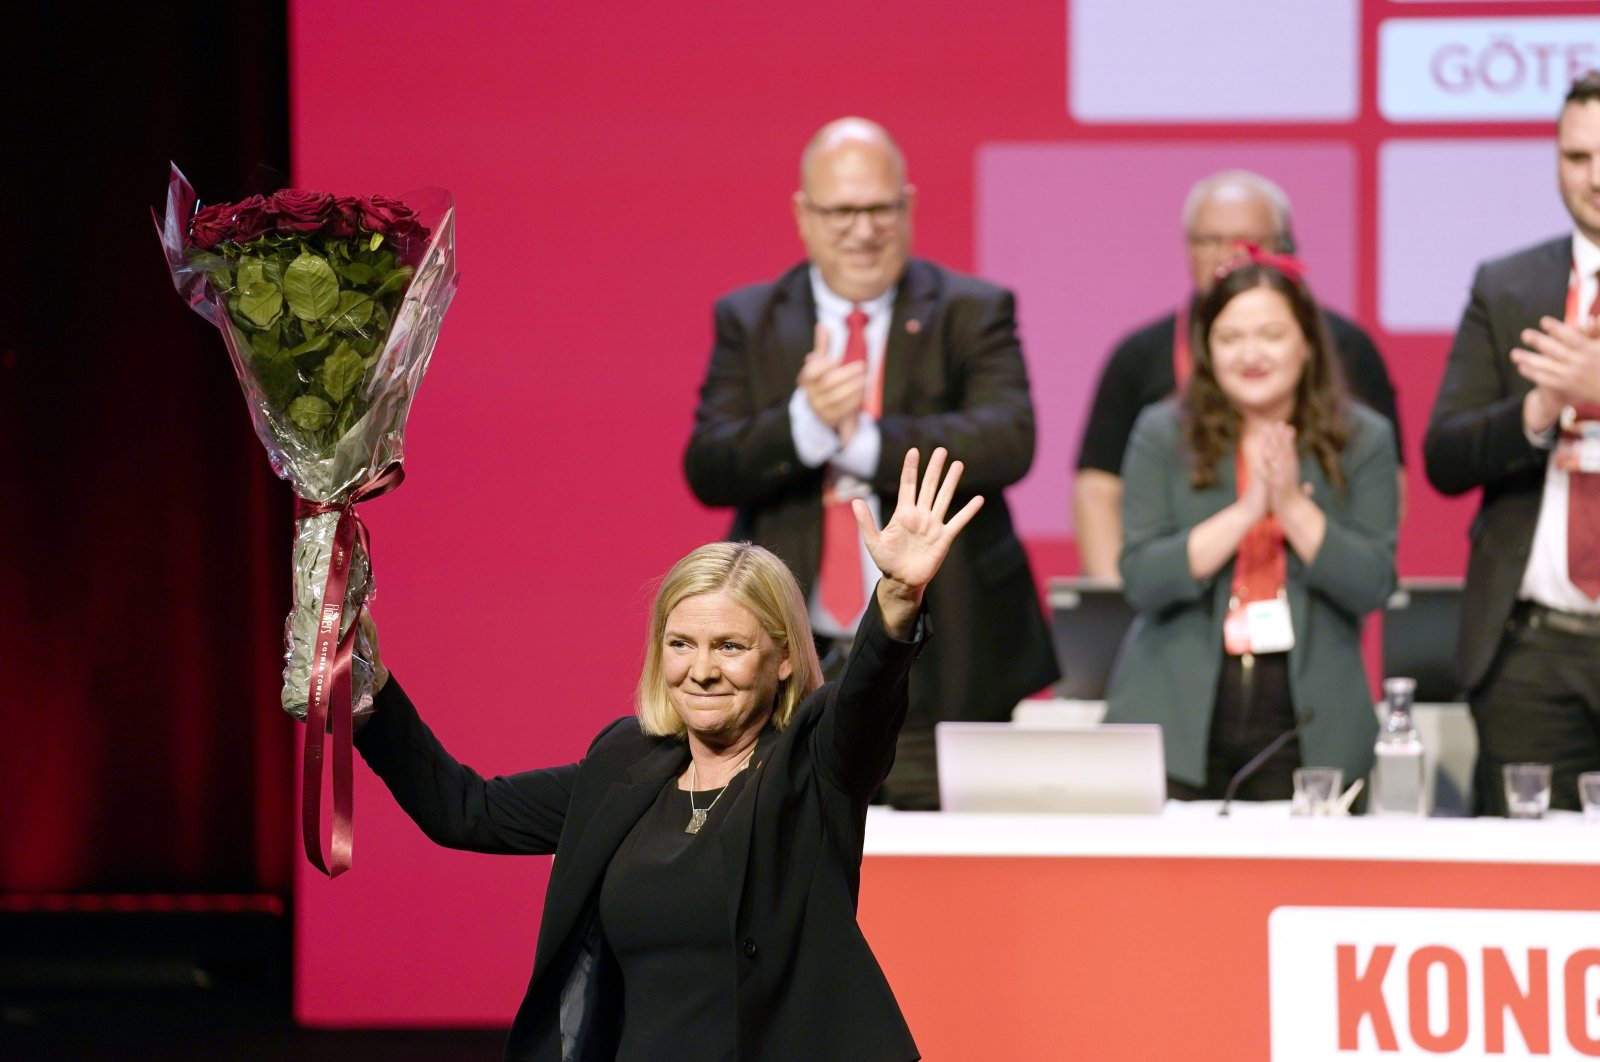 Sweden's Minister of Finance Magdalena Andersson gestures, after being elected to party chair of the Social Democratic Party at the Social Democratic Party congress in Gothenburg, Sweden, Thursday, Nov. 4, 2021. (AP Photo)